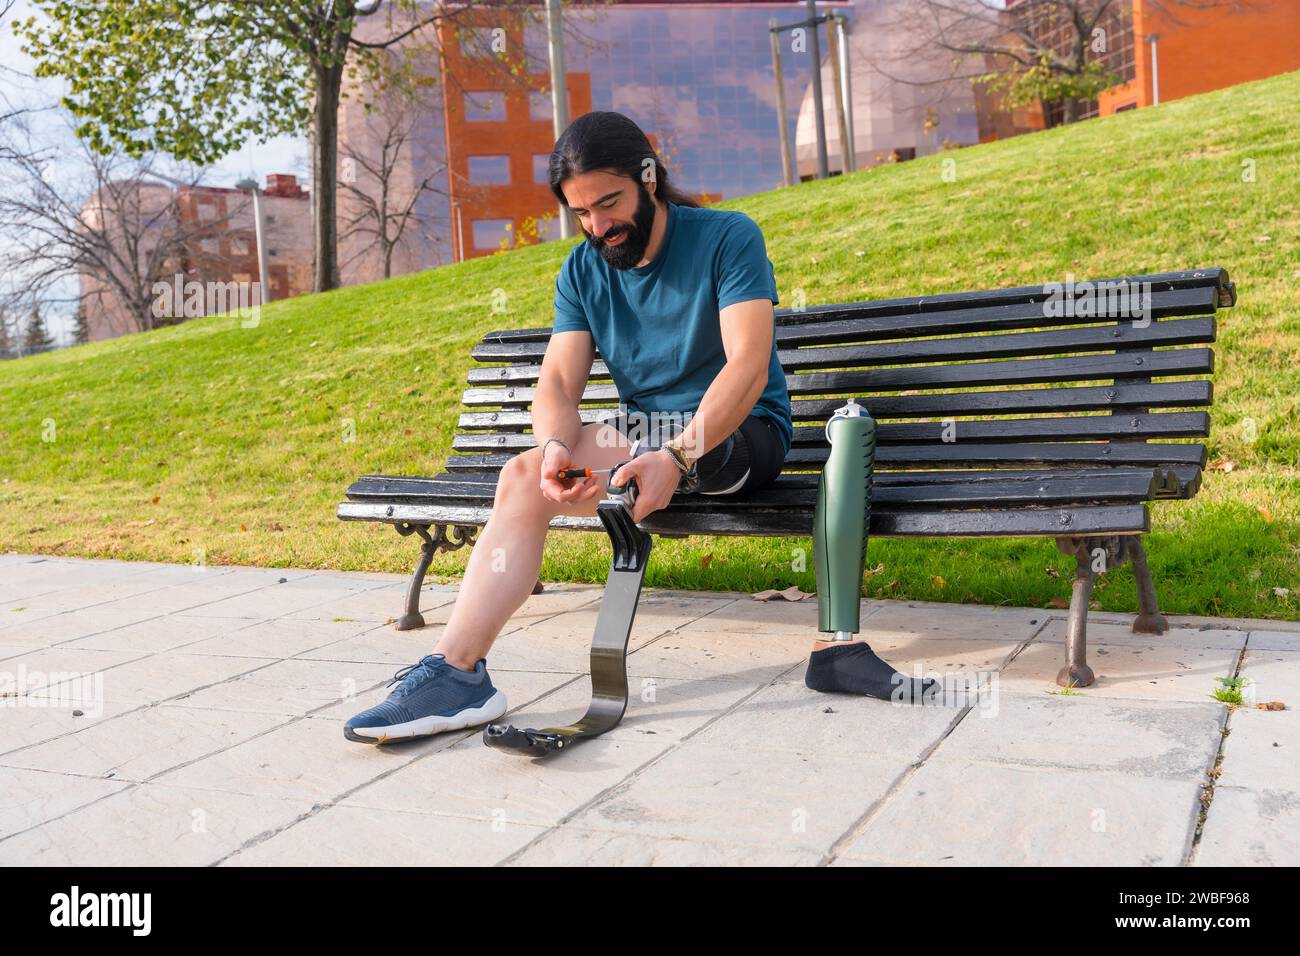 Physically disabled man adjusting prosthetic leg before running sitting on an urban park bench Stock Photo